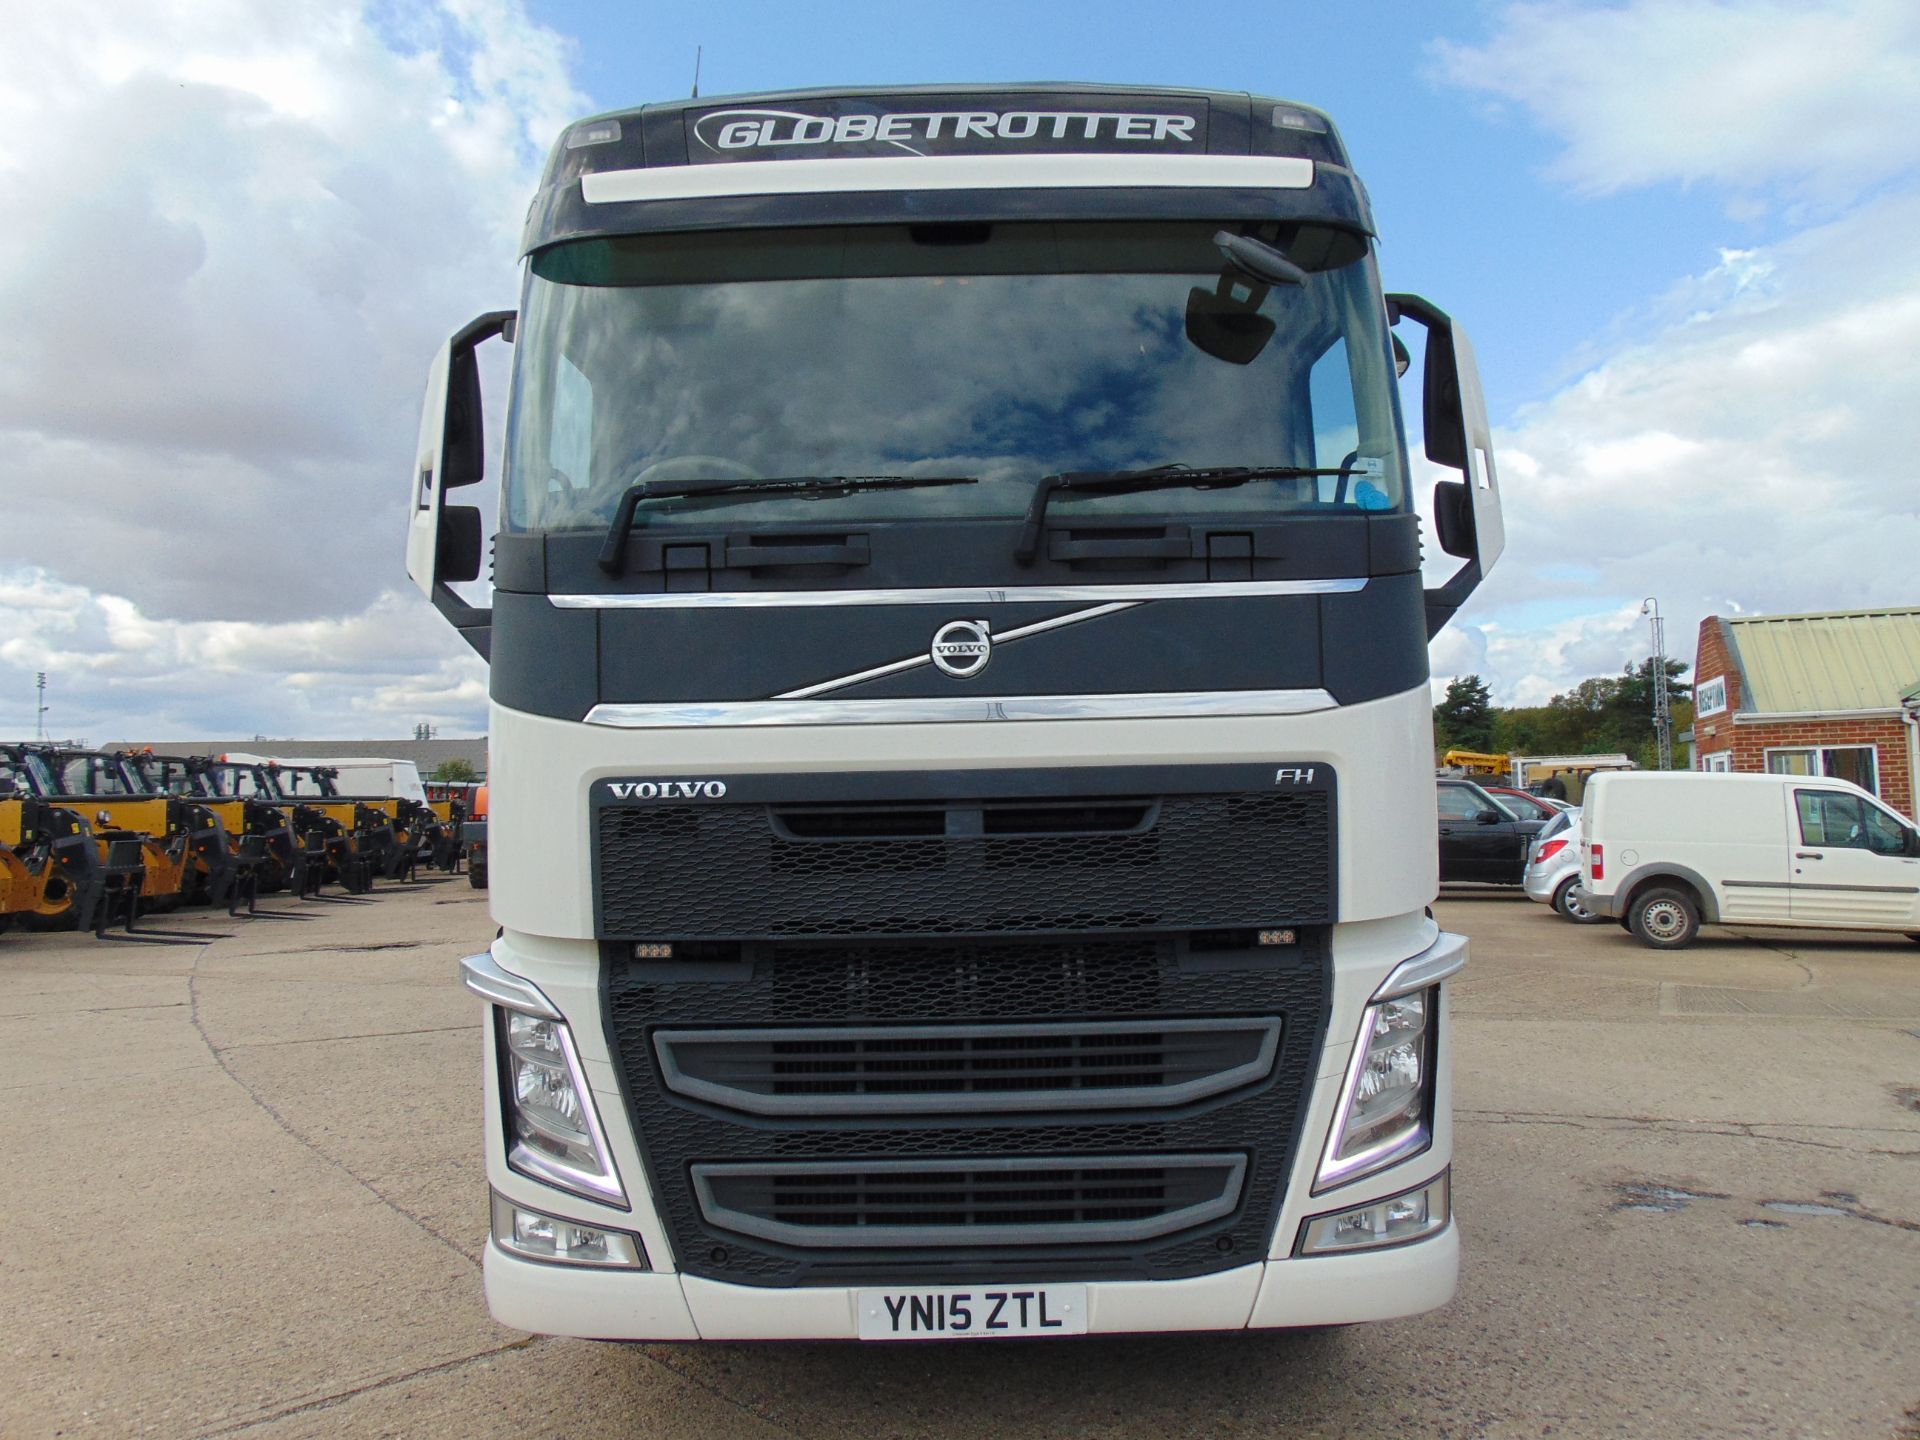 2015 Volvo FH 500 Globetrotter 6x2 44ton Tractor unit - Image 2 of 27